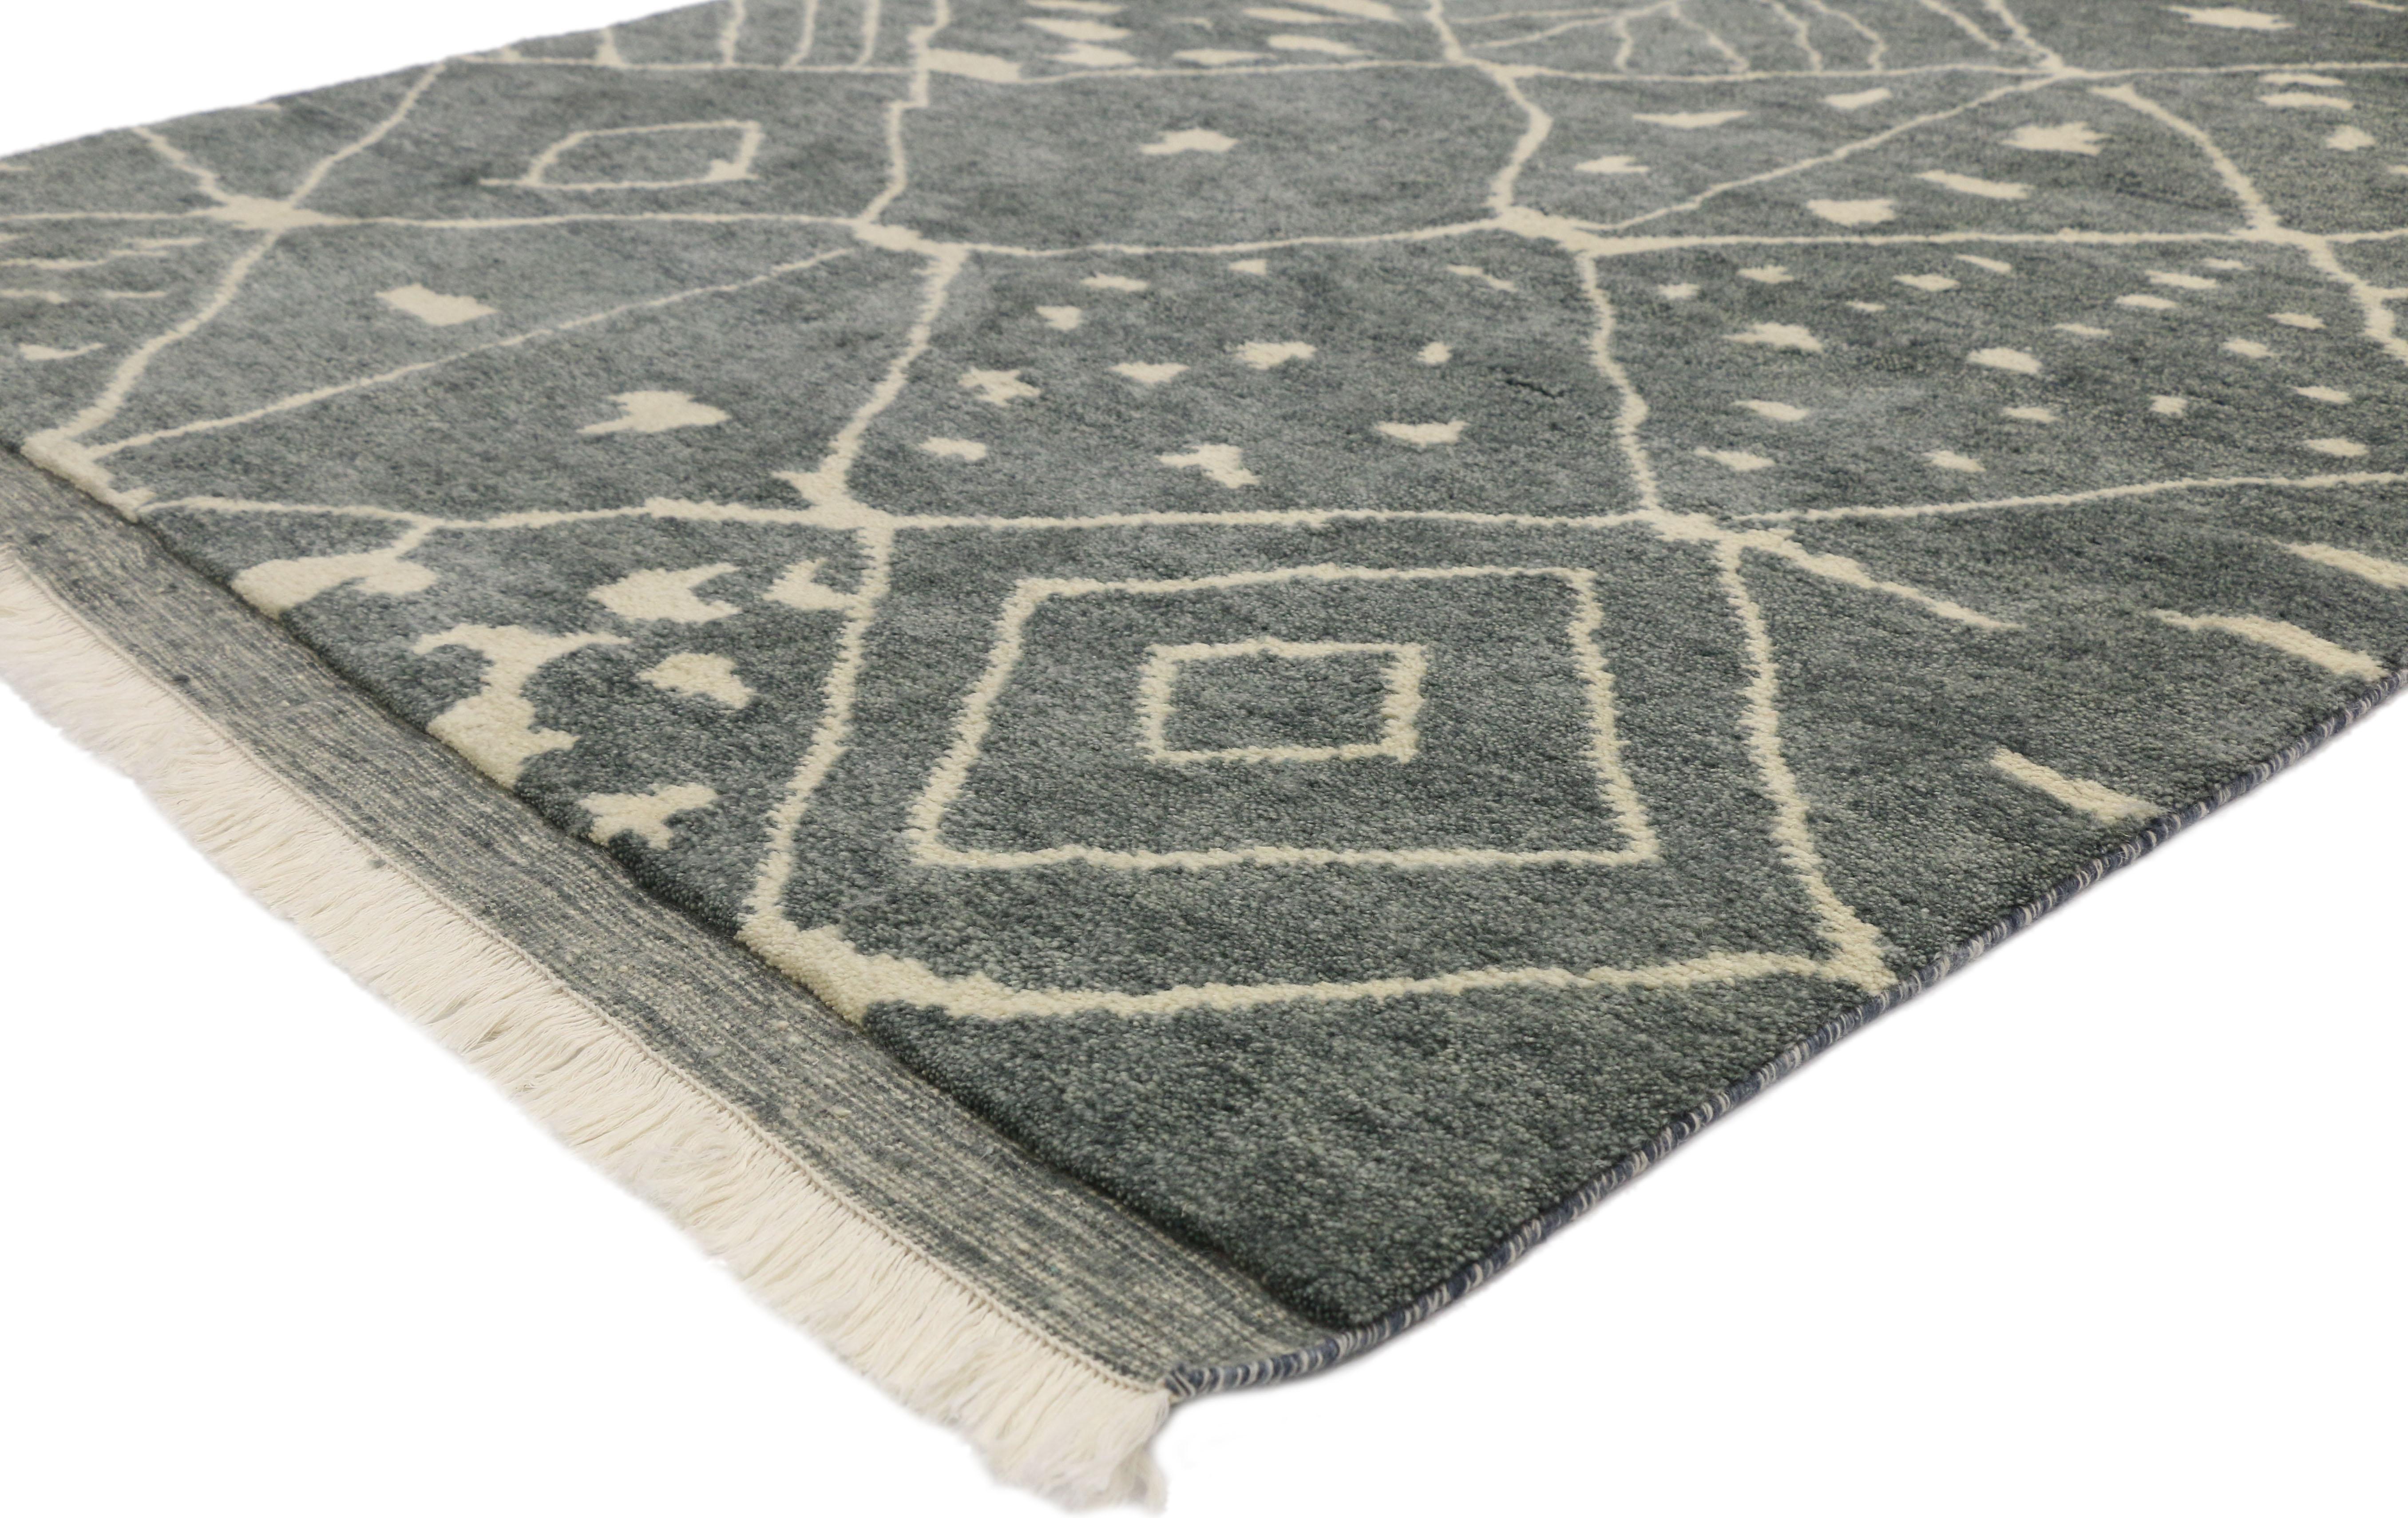 30501, new contemporary Moroccan area rug with organic modern and Hygge style. This hand knotted wool contemporary Moroccan area rug showcases an all-over diamond pattern on a sultry slate gray backdrop. The light gray-beige lines crisscross in an